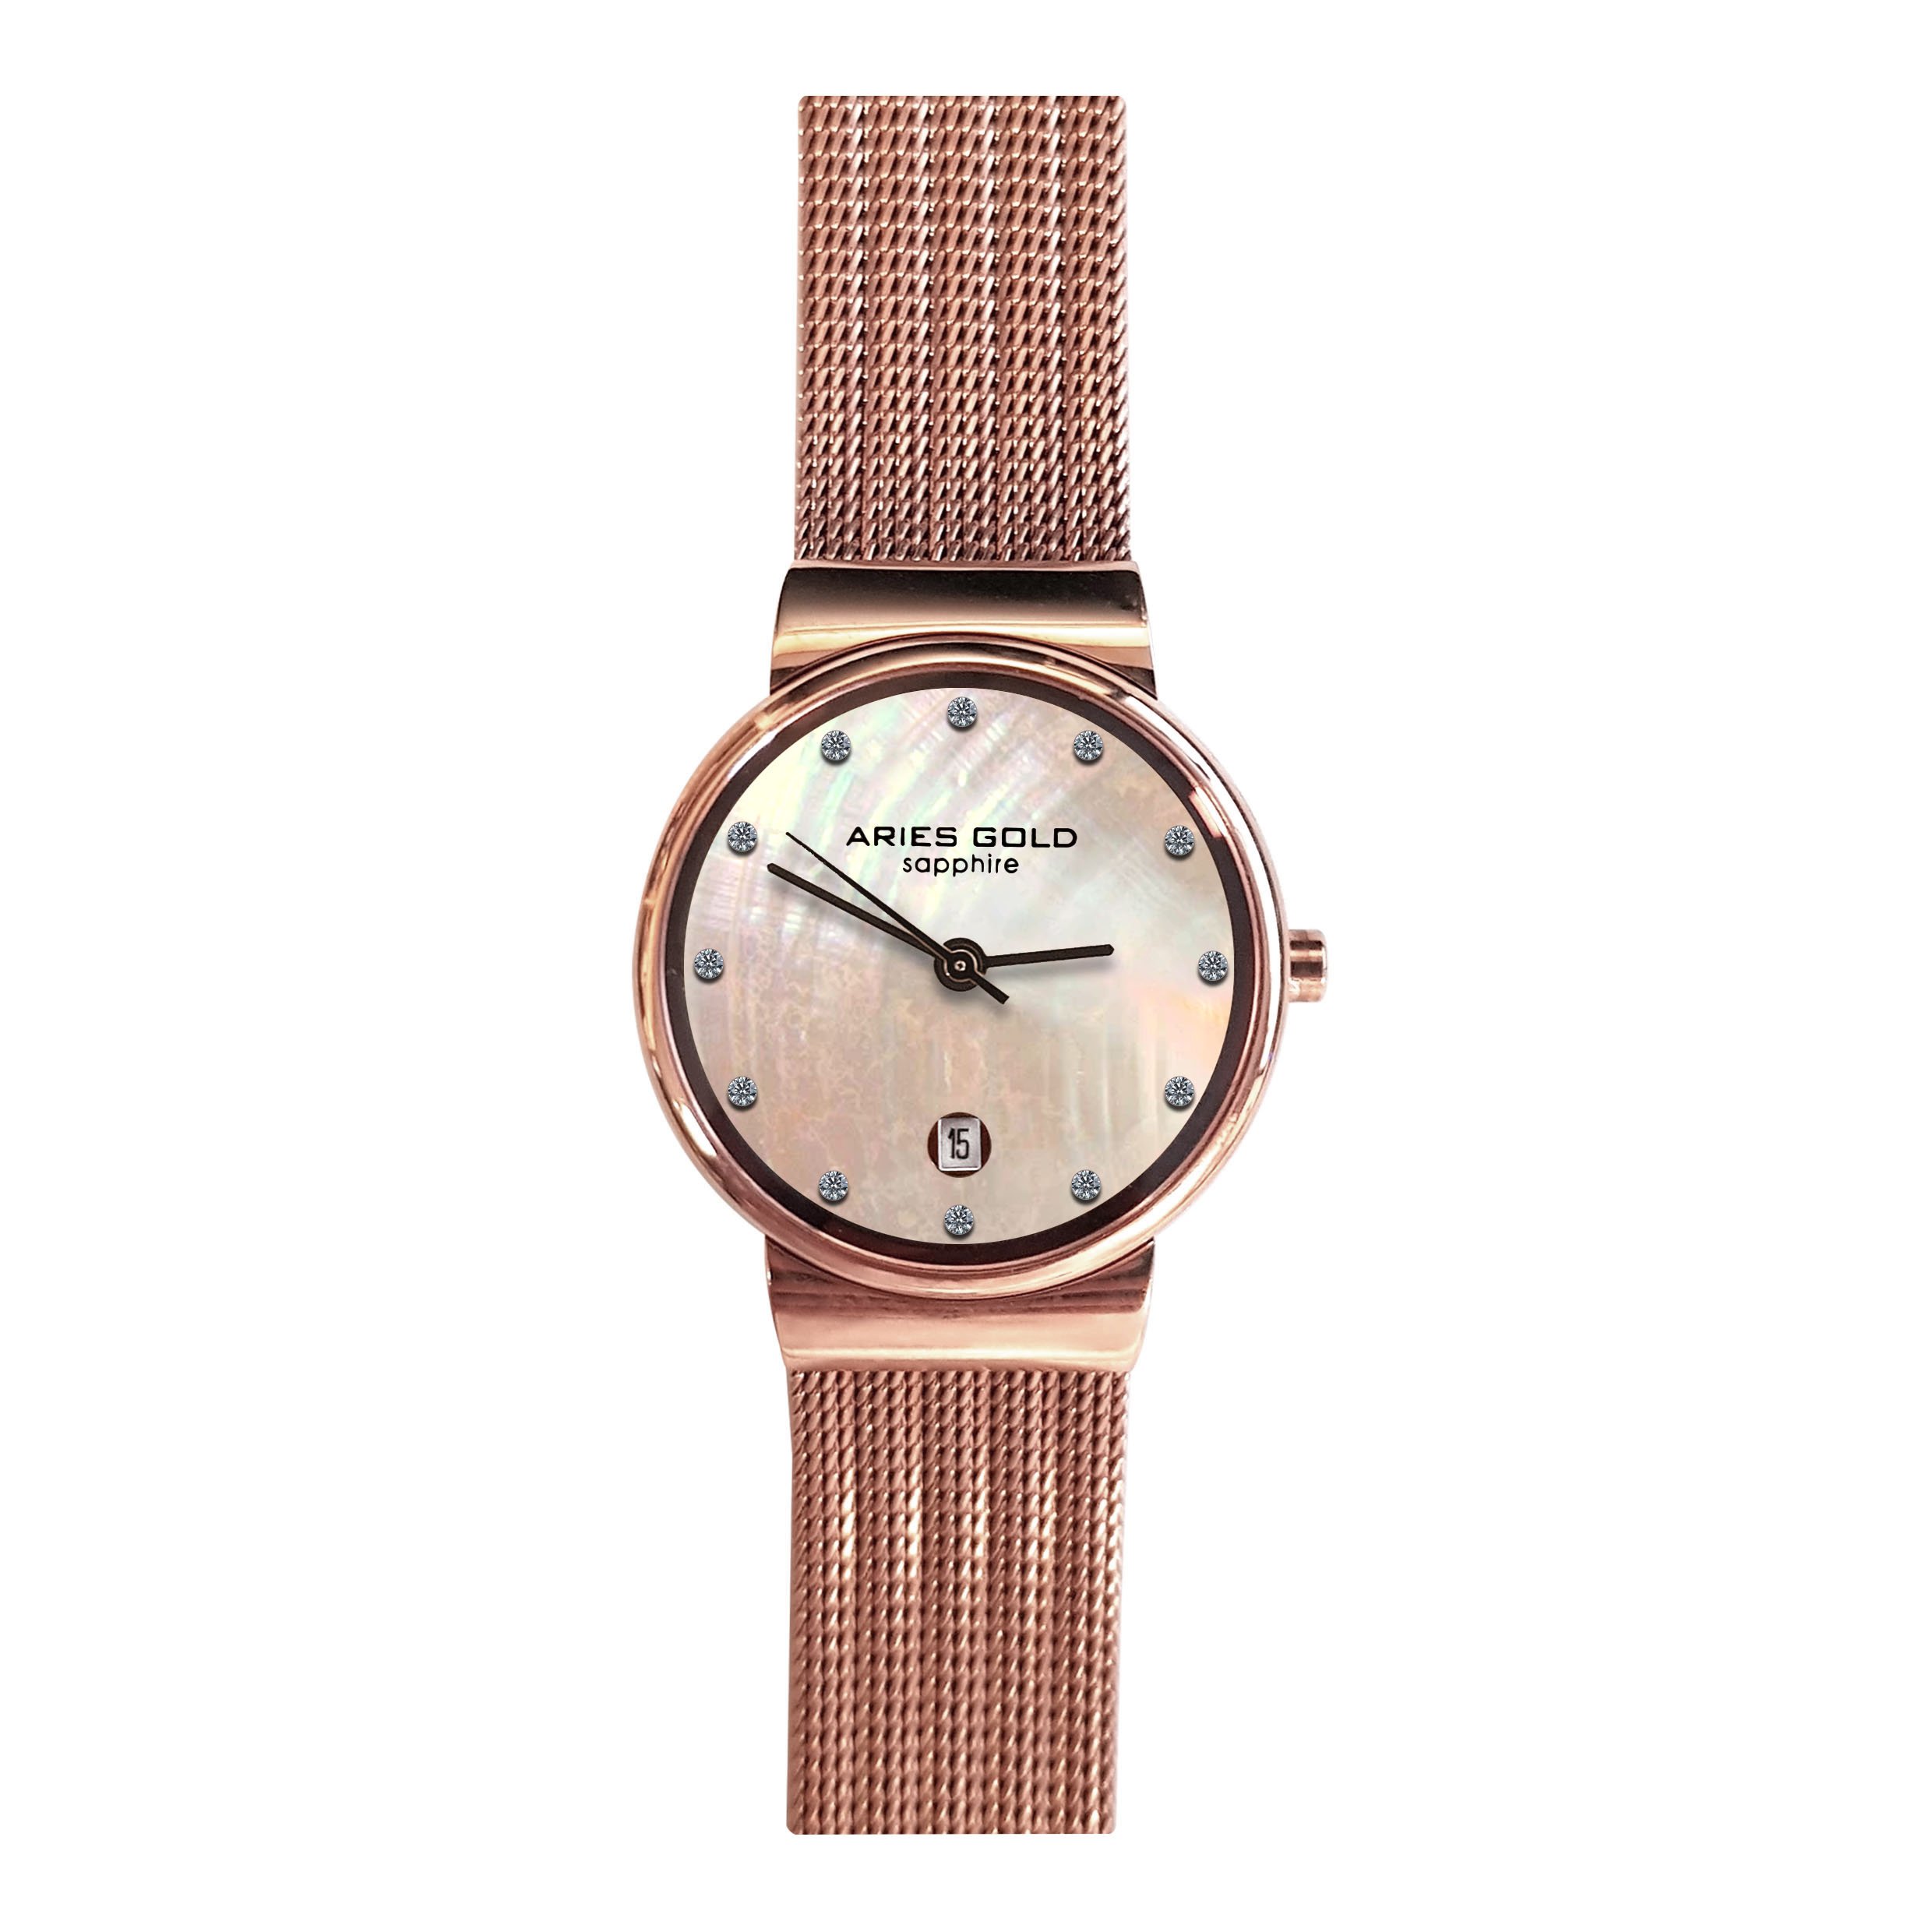 ARIES GOLD ENCHANT CAMILLE ROSE GOLD STAINLESS STEEL L 5002 RG-MOP MESH STRAP WOMEN'S WATCH